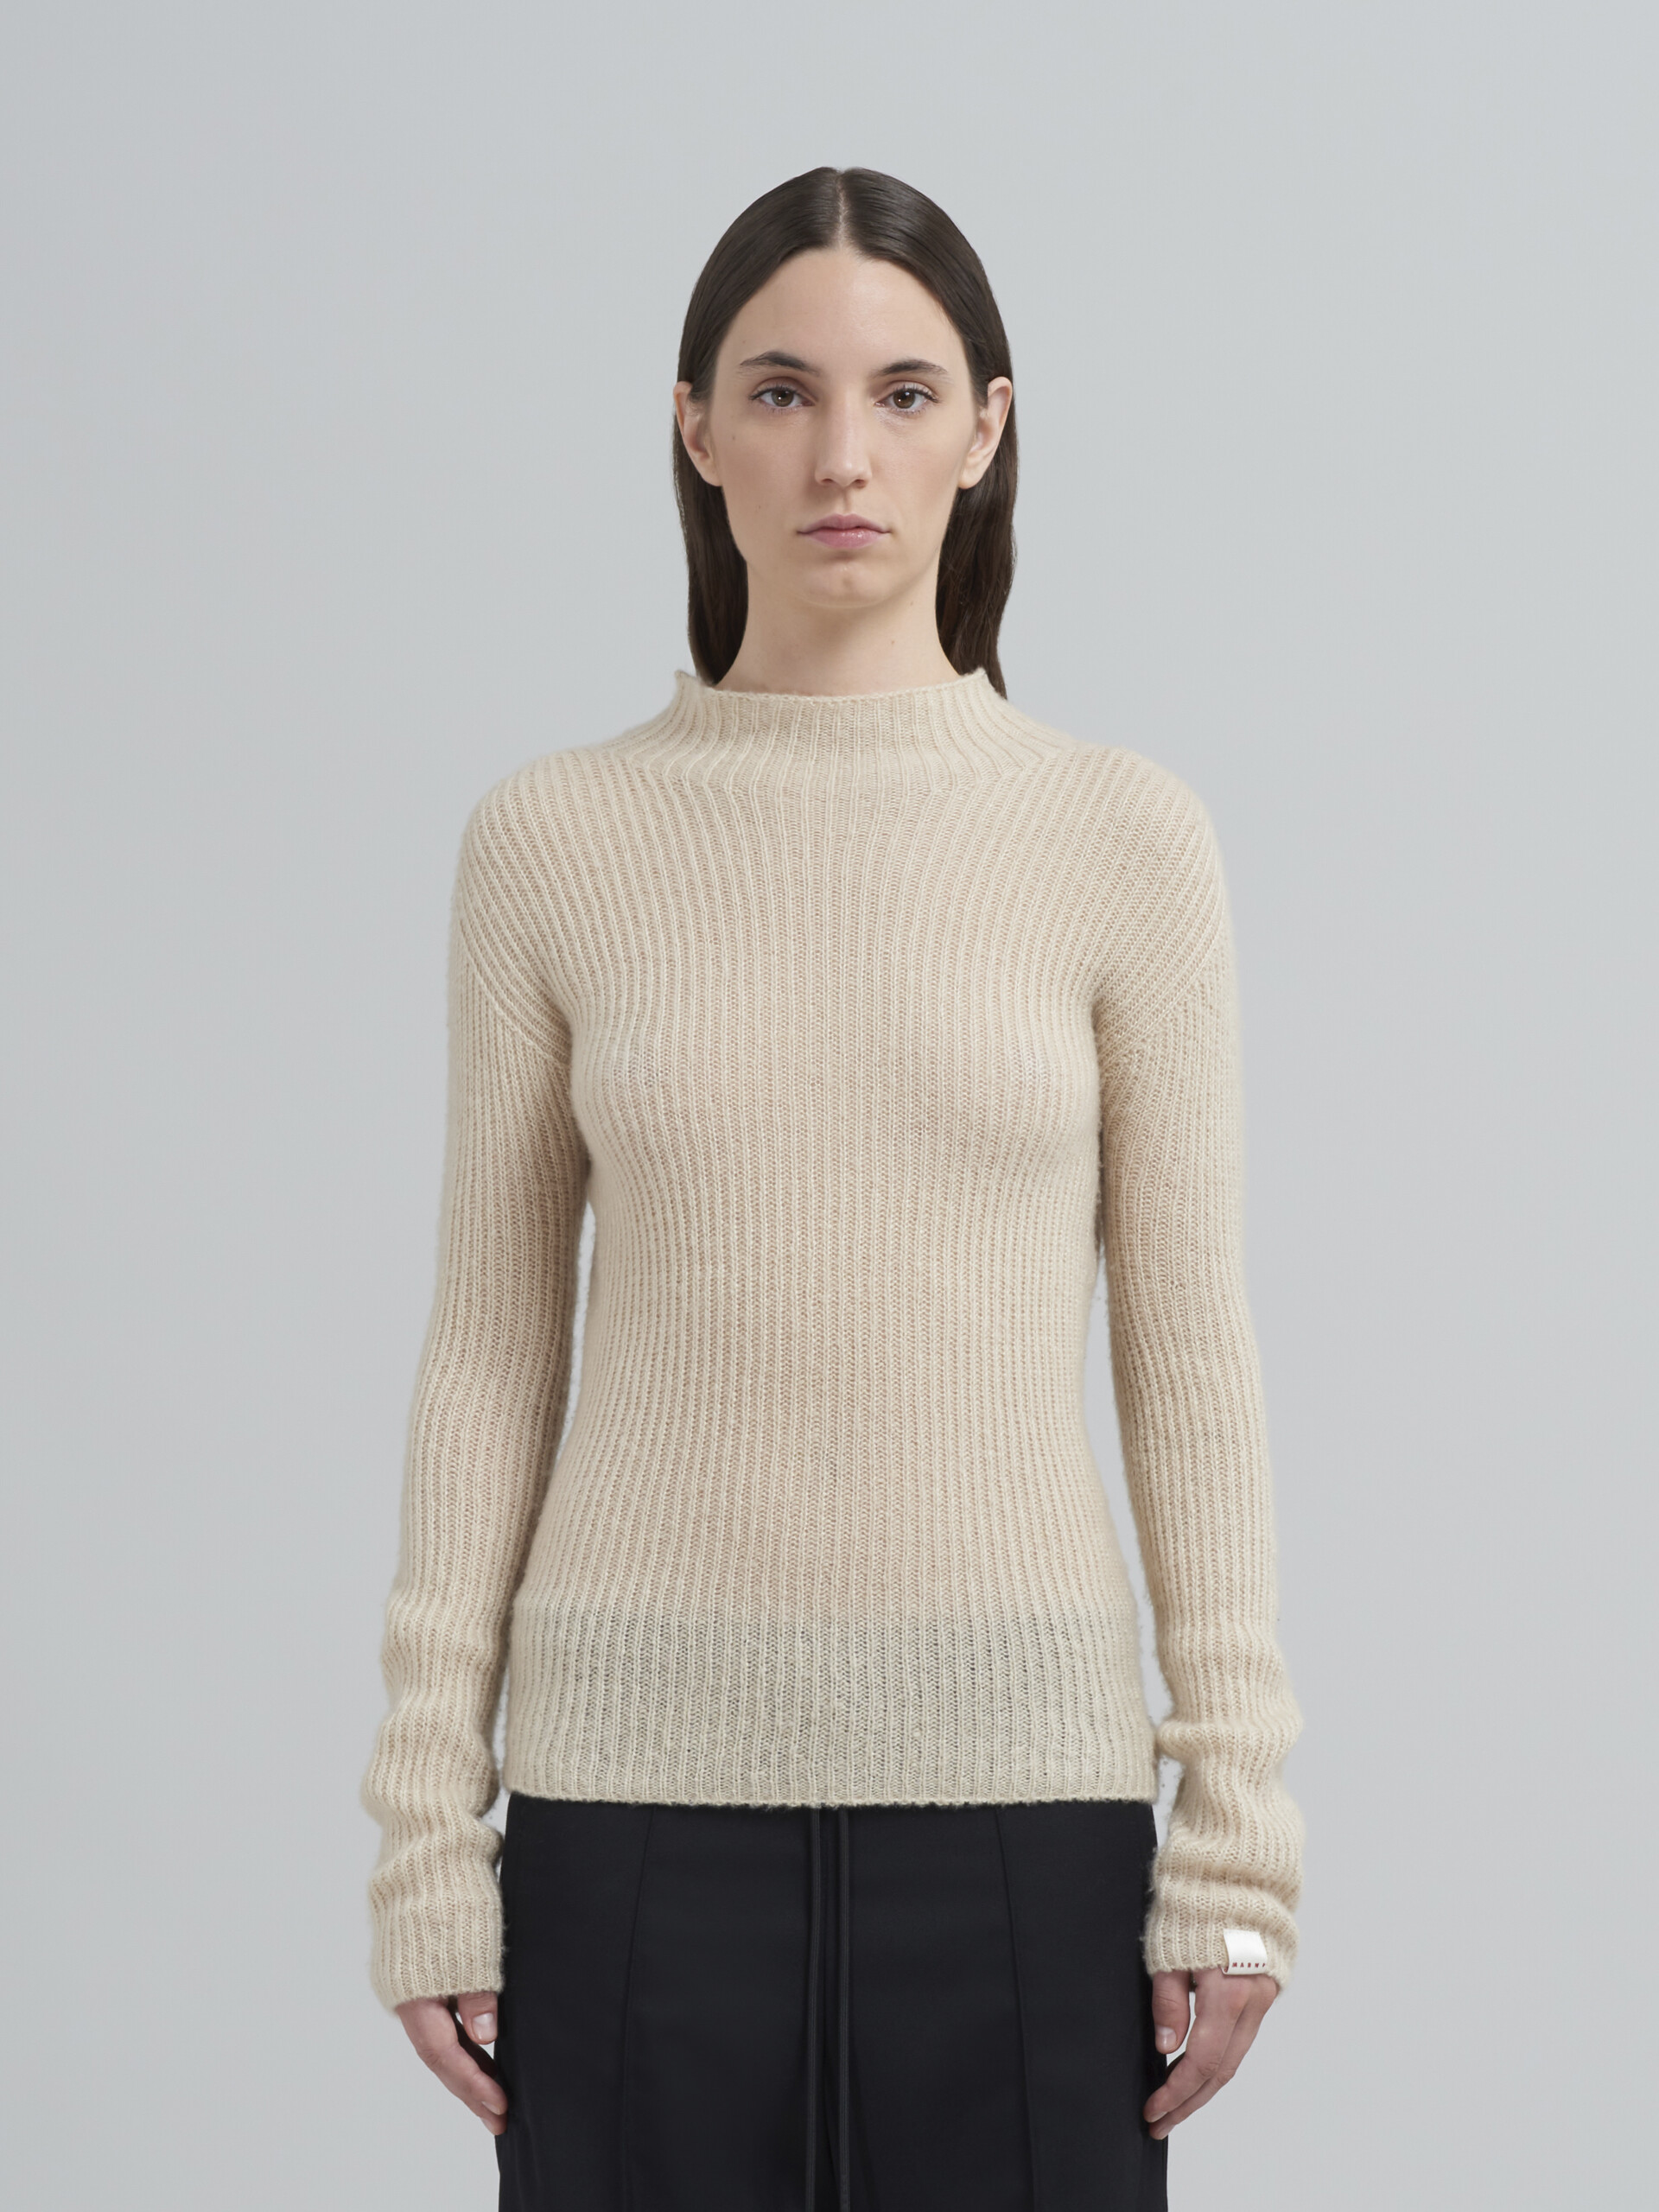 Silk and cashmere sweater - Pullovers - Image 2